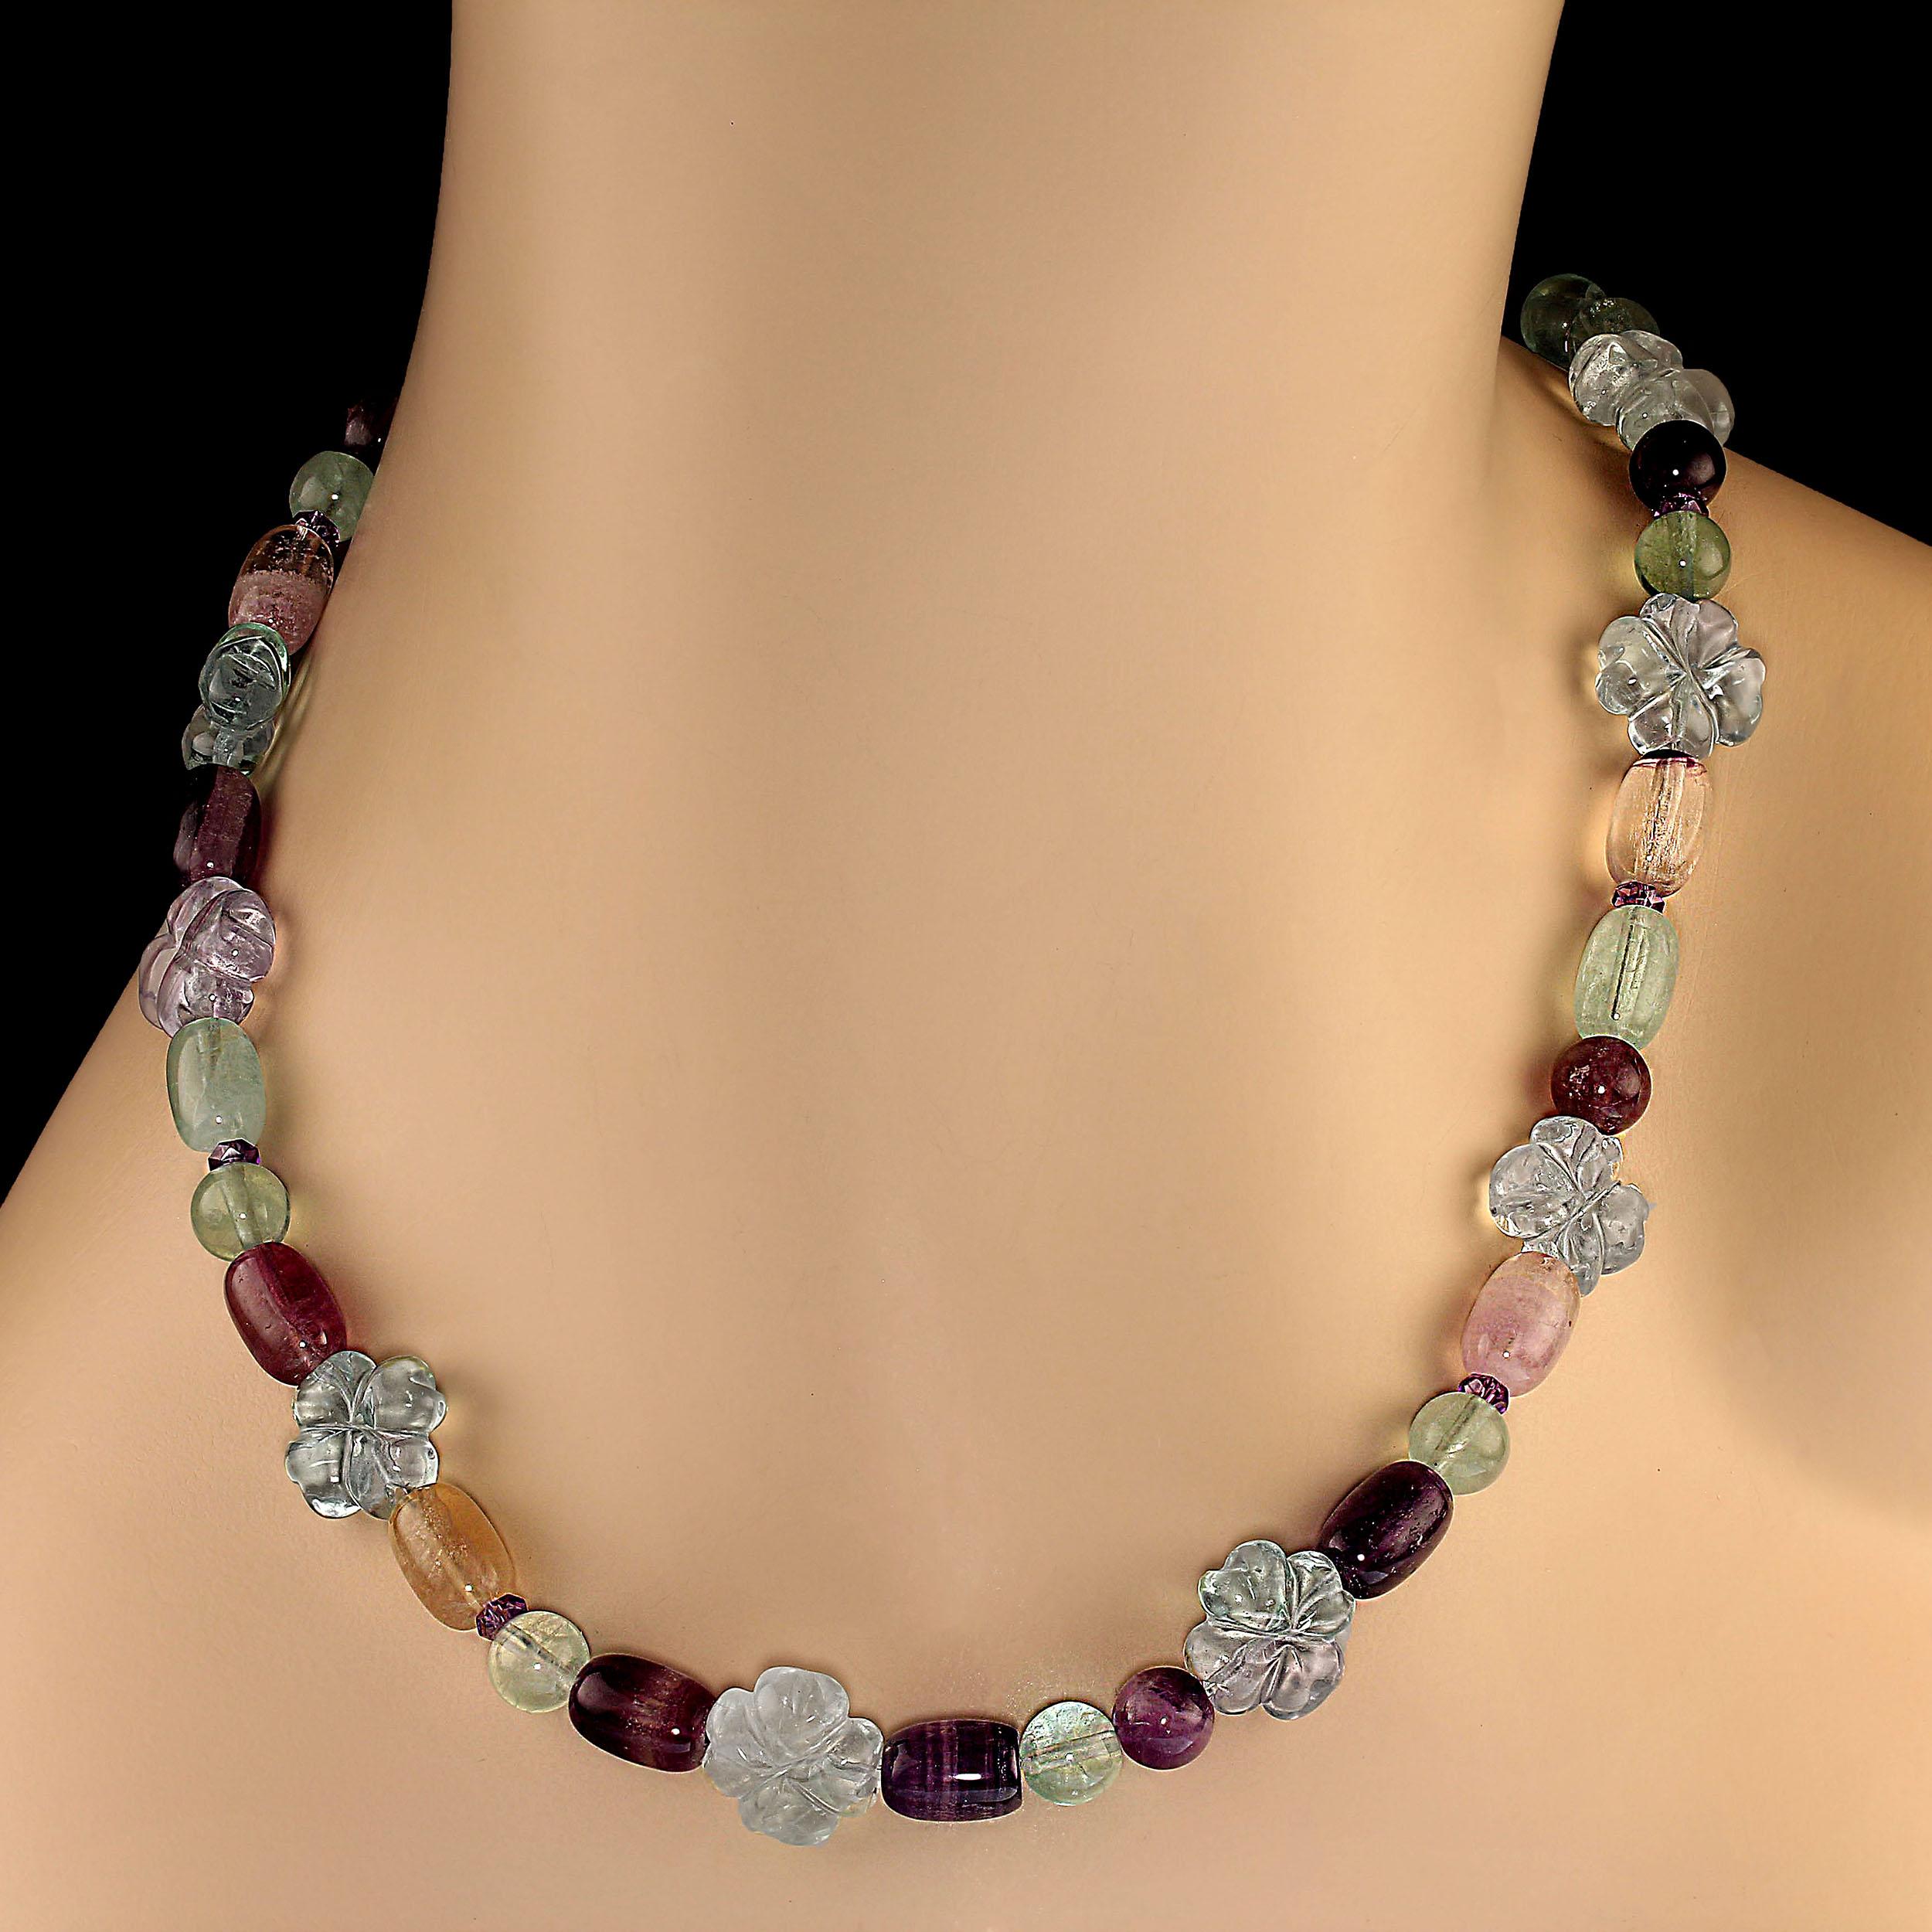 25-Inch fabulous fluorite necklace great for Spring.  This necklace features green, purple, gold, pink, and lilac fluorite in various shapes including flowers, barrel, and round.  We've added sparkling amethyst rondels for more pops of color. 